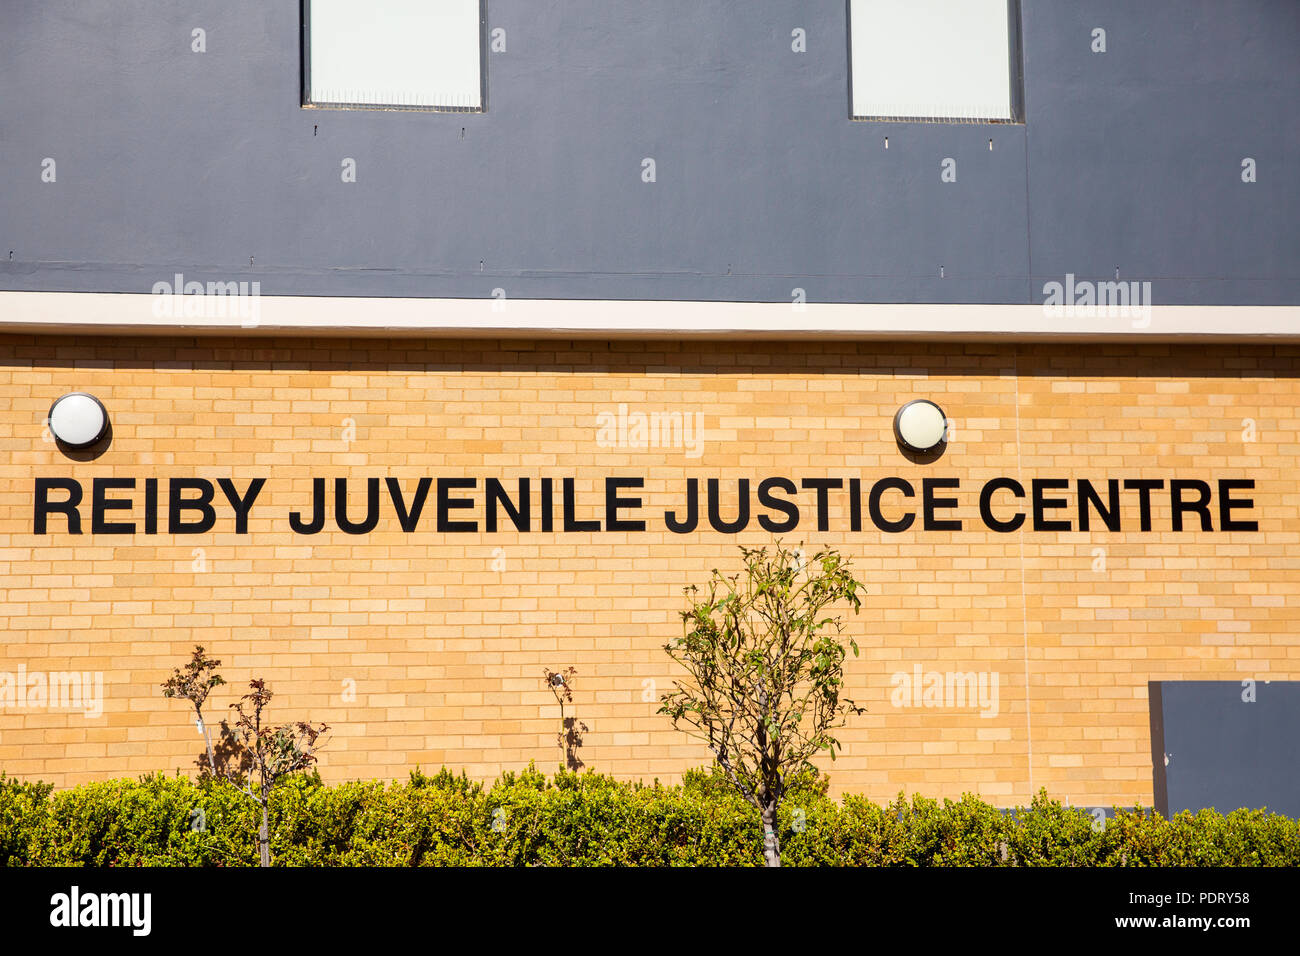 Reiby Juvenile Justice centre for young offenders in Campbelltown,South West Sydney,Australia Stock Photo